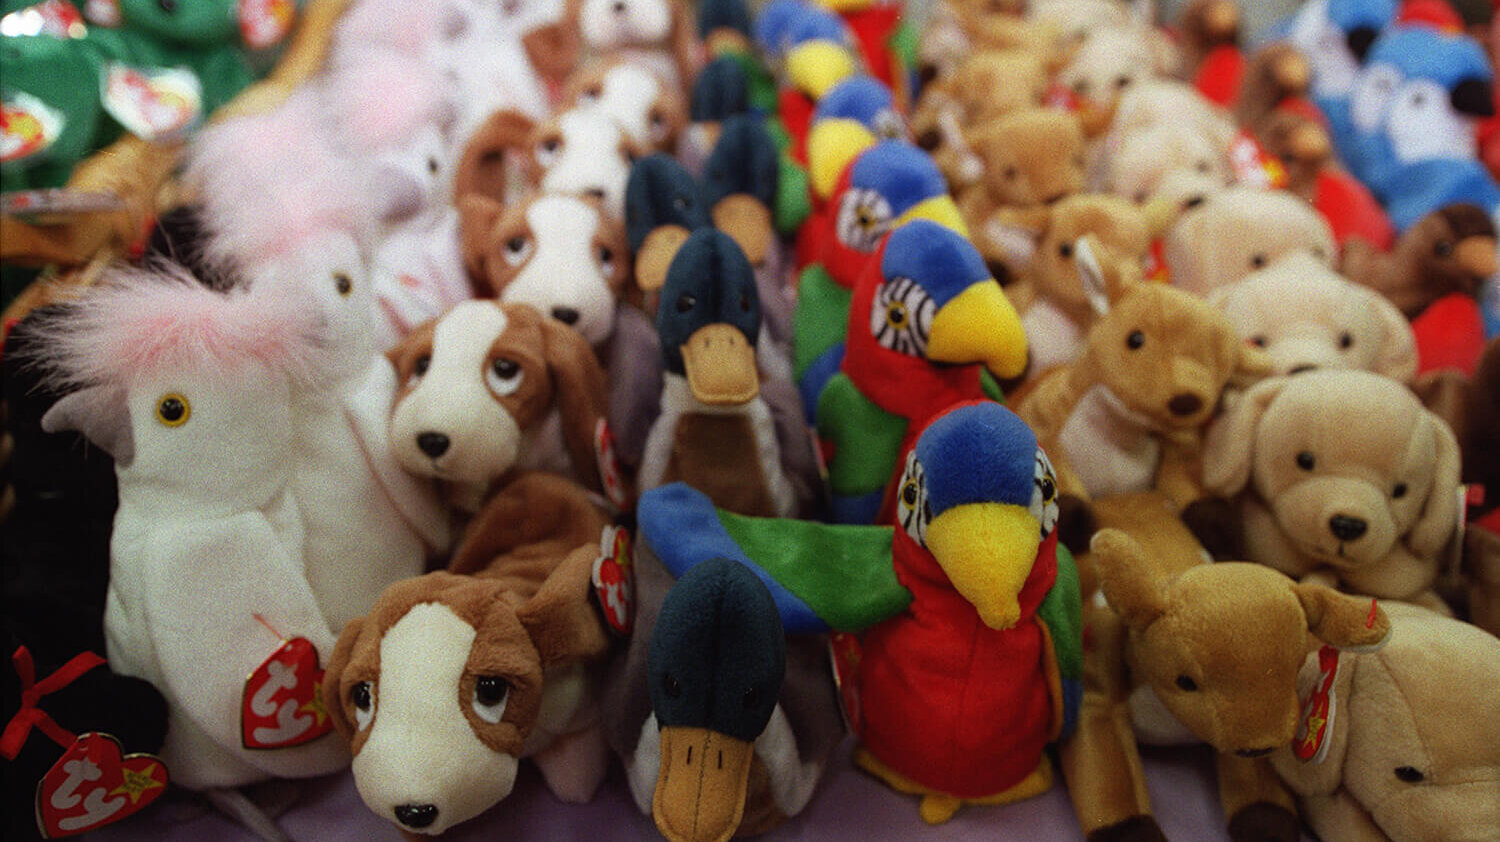 Your old Beanie Babies could be worth thousands